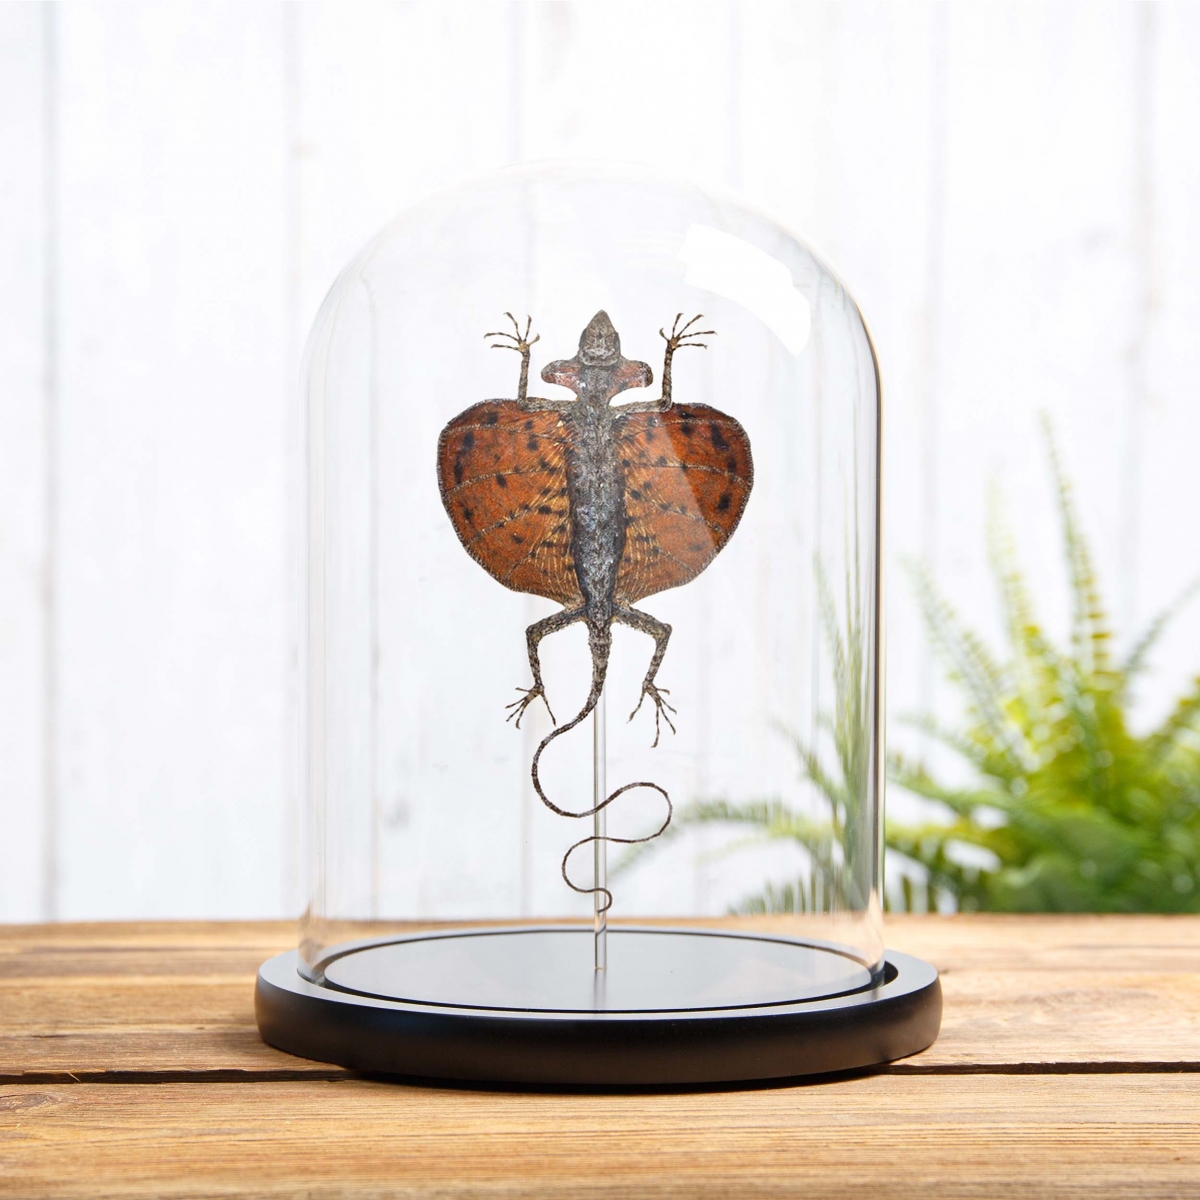 Minibeast Red Flying Lizard in Glass Dome with Wooden Base (Draco haematopogon)